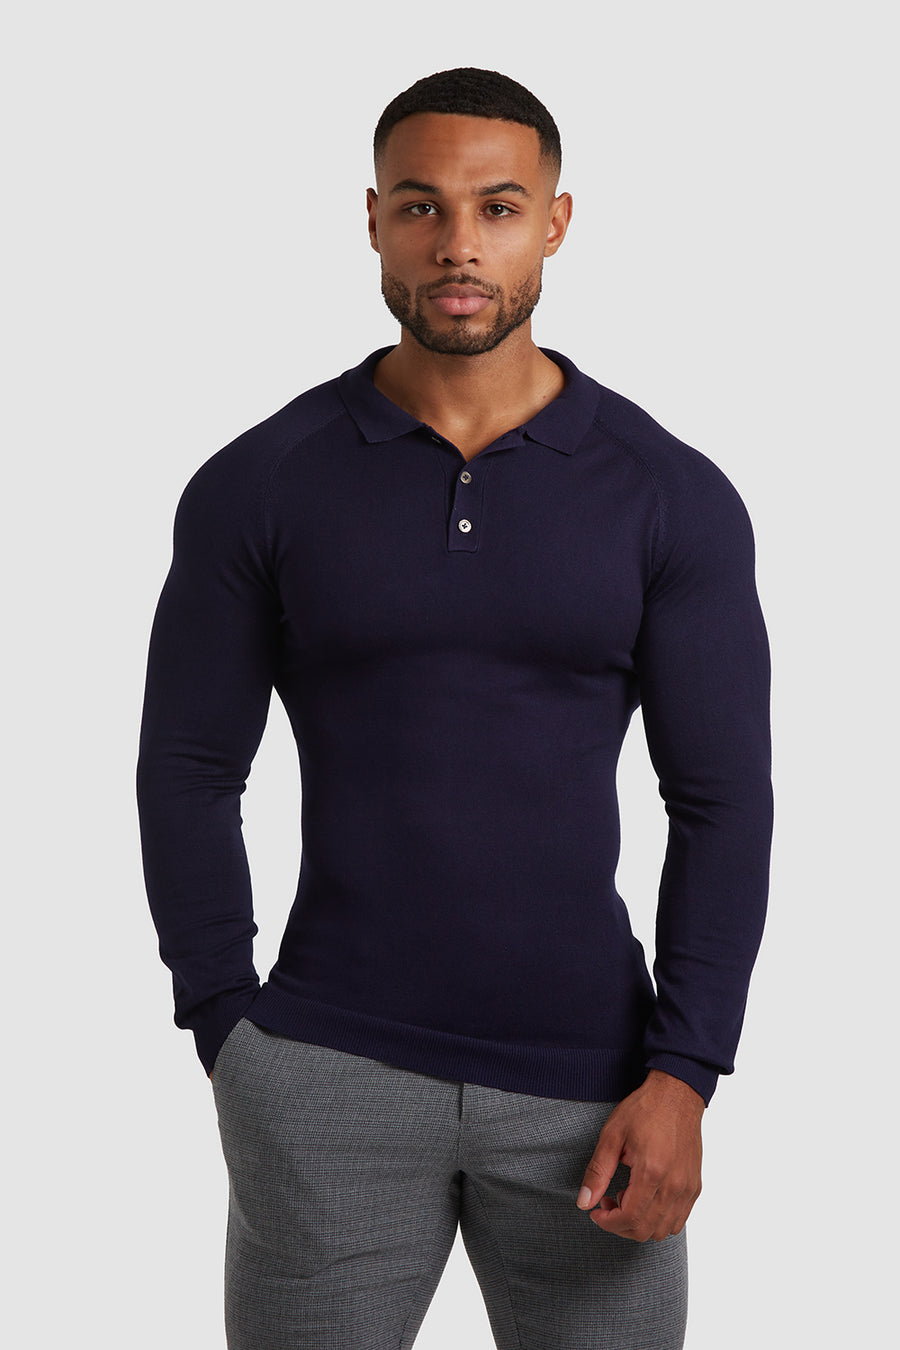 Knit Polo Shirt Long Sleeve in Navy - TAILORED ATHLETE - USA